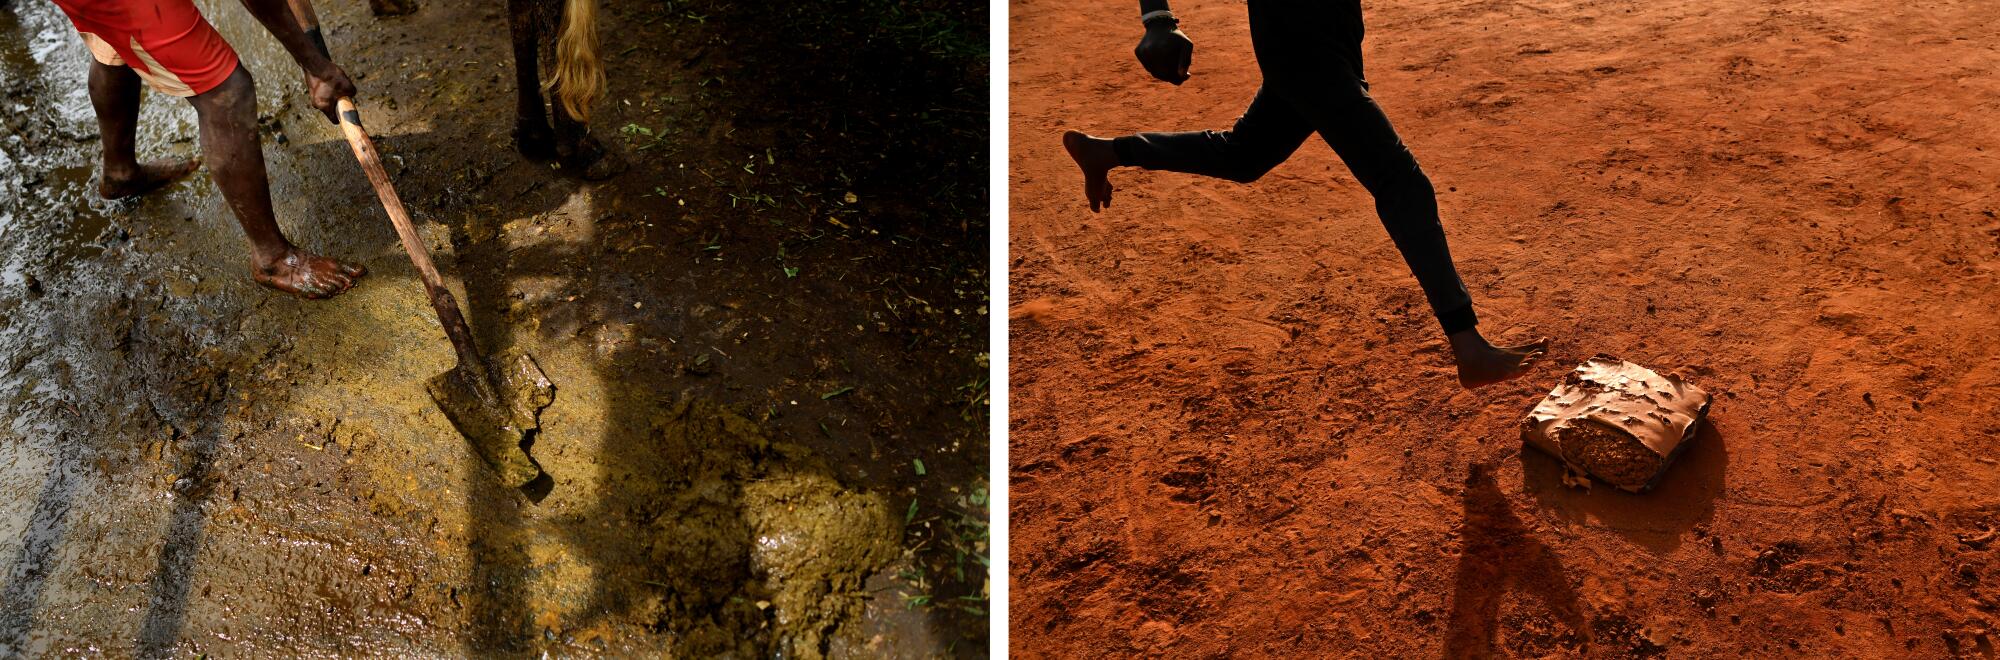 A diptych of barefoot person holding a broken shovel, left, and a baseball player running the bases barefoot 